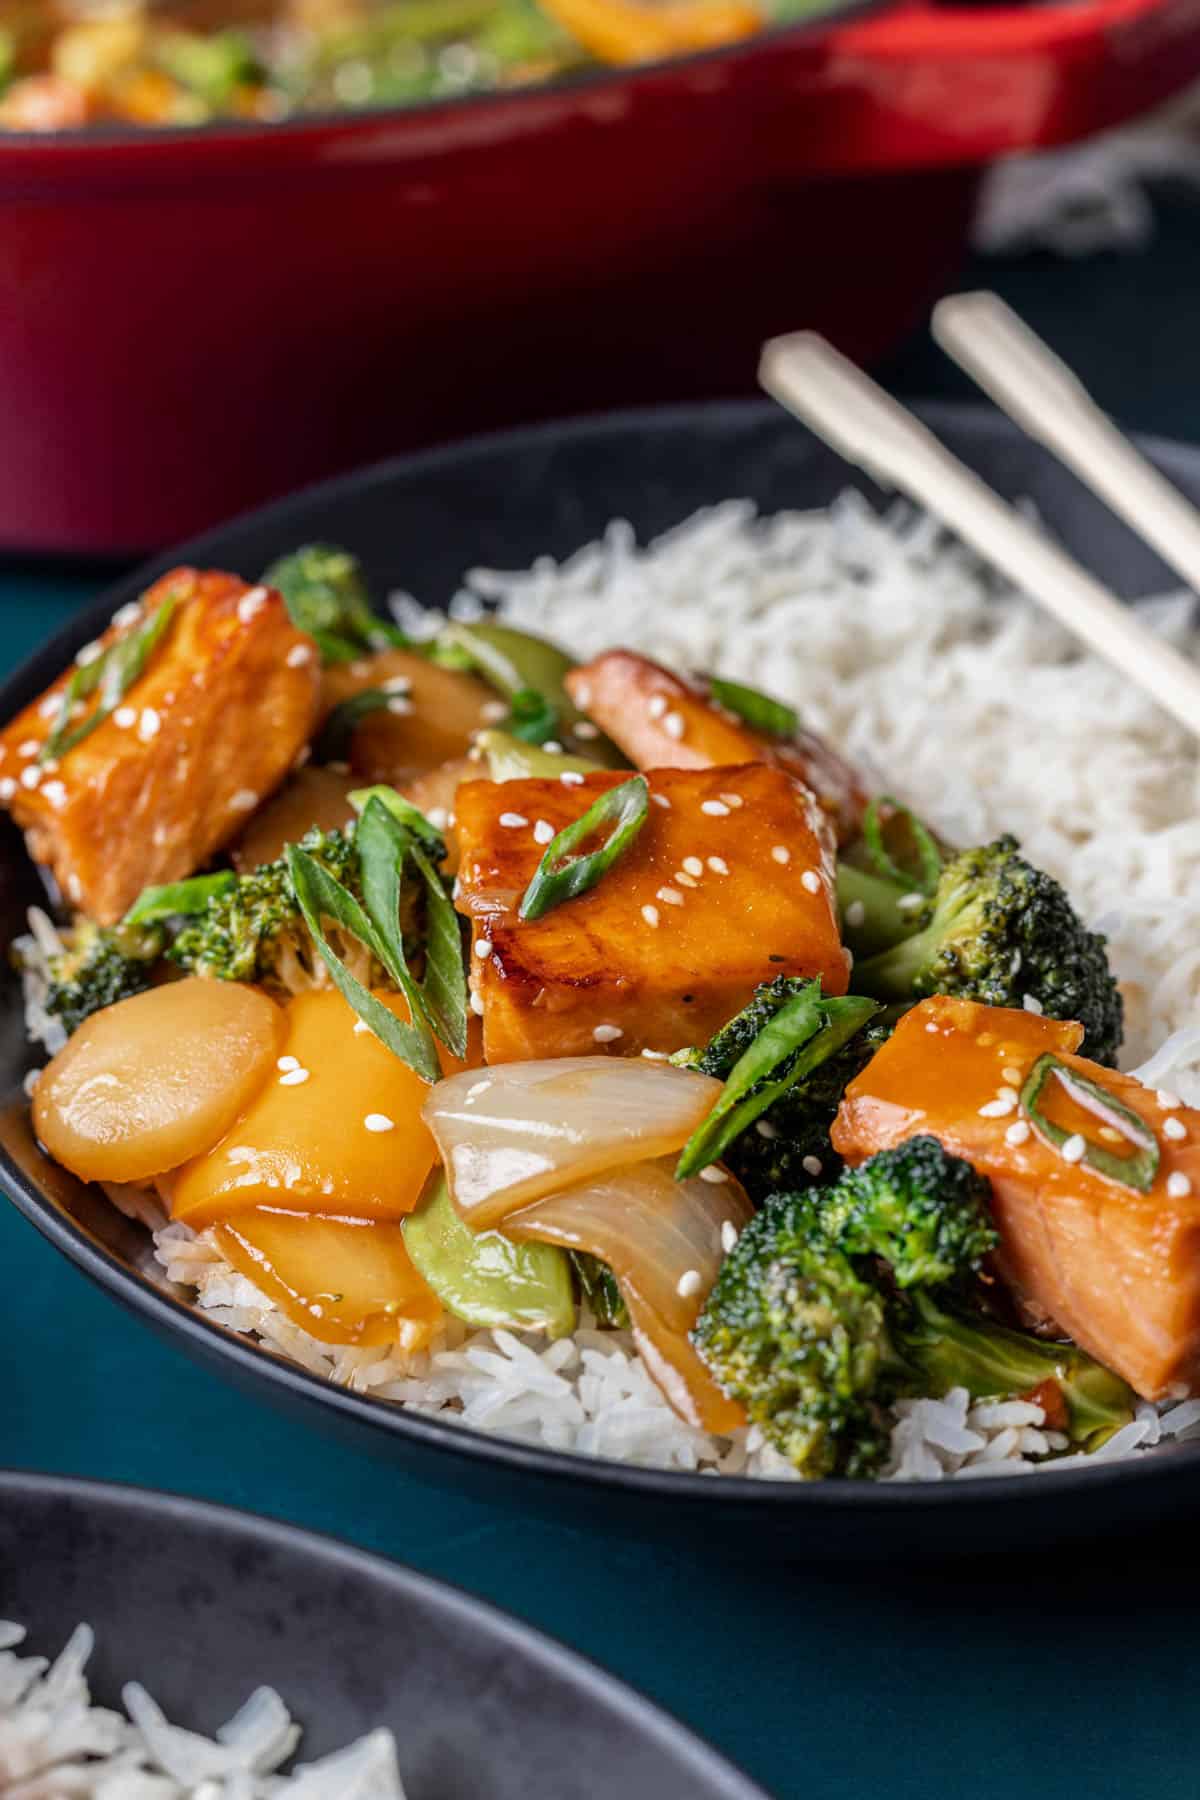 A piece of salmon glazed in teriyaki sauce on top of stir fried vegetables and white rice.